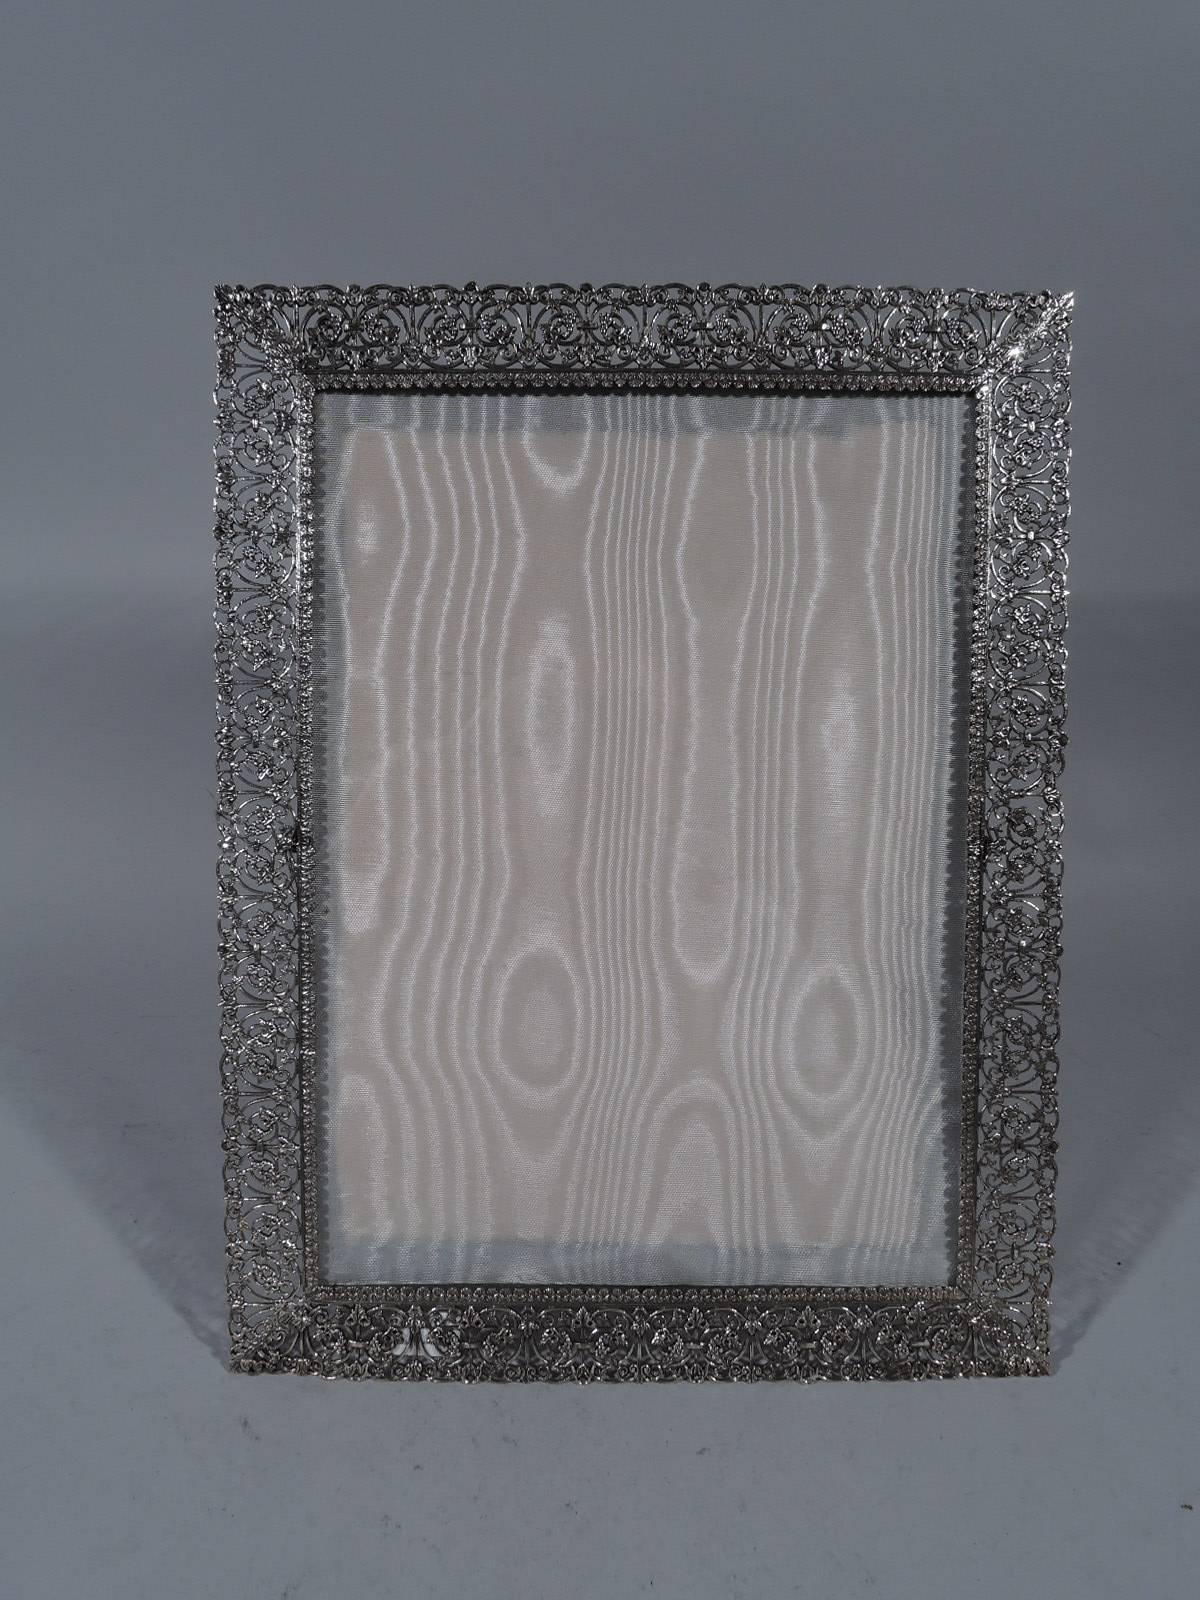 Italian handmade sterling silver filigree picture frame. Rectangular window bordered by scrolled filigree with applied flowers and leaves. With glass, silk lining, and velvet back and hinged support. For portrait (vertical) or landscape (horizontal)